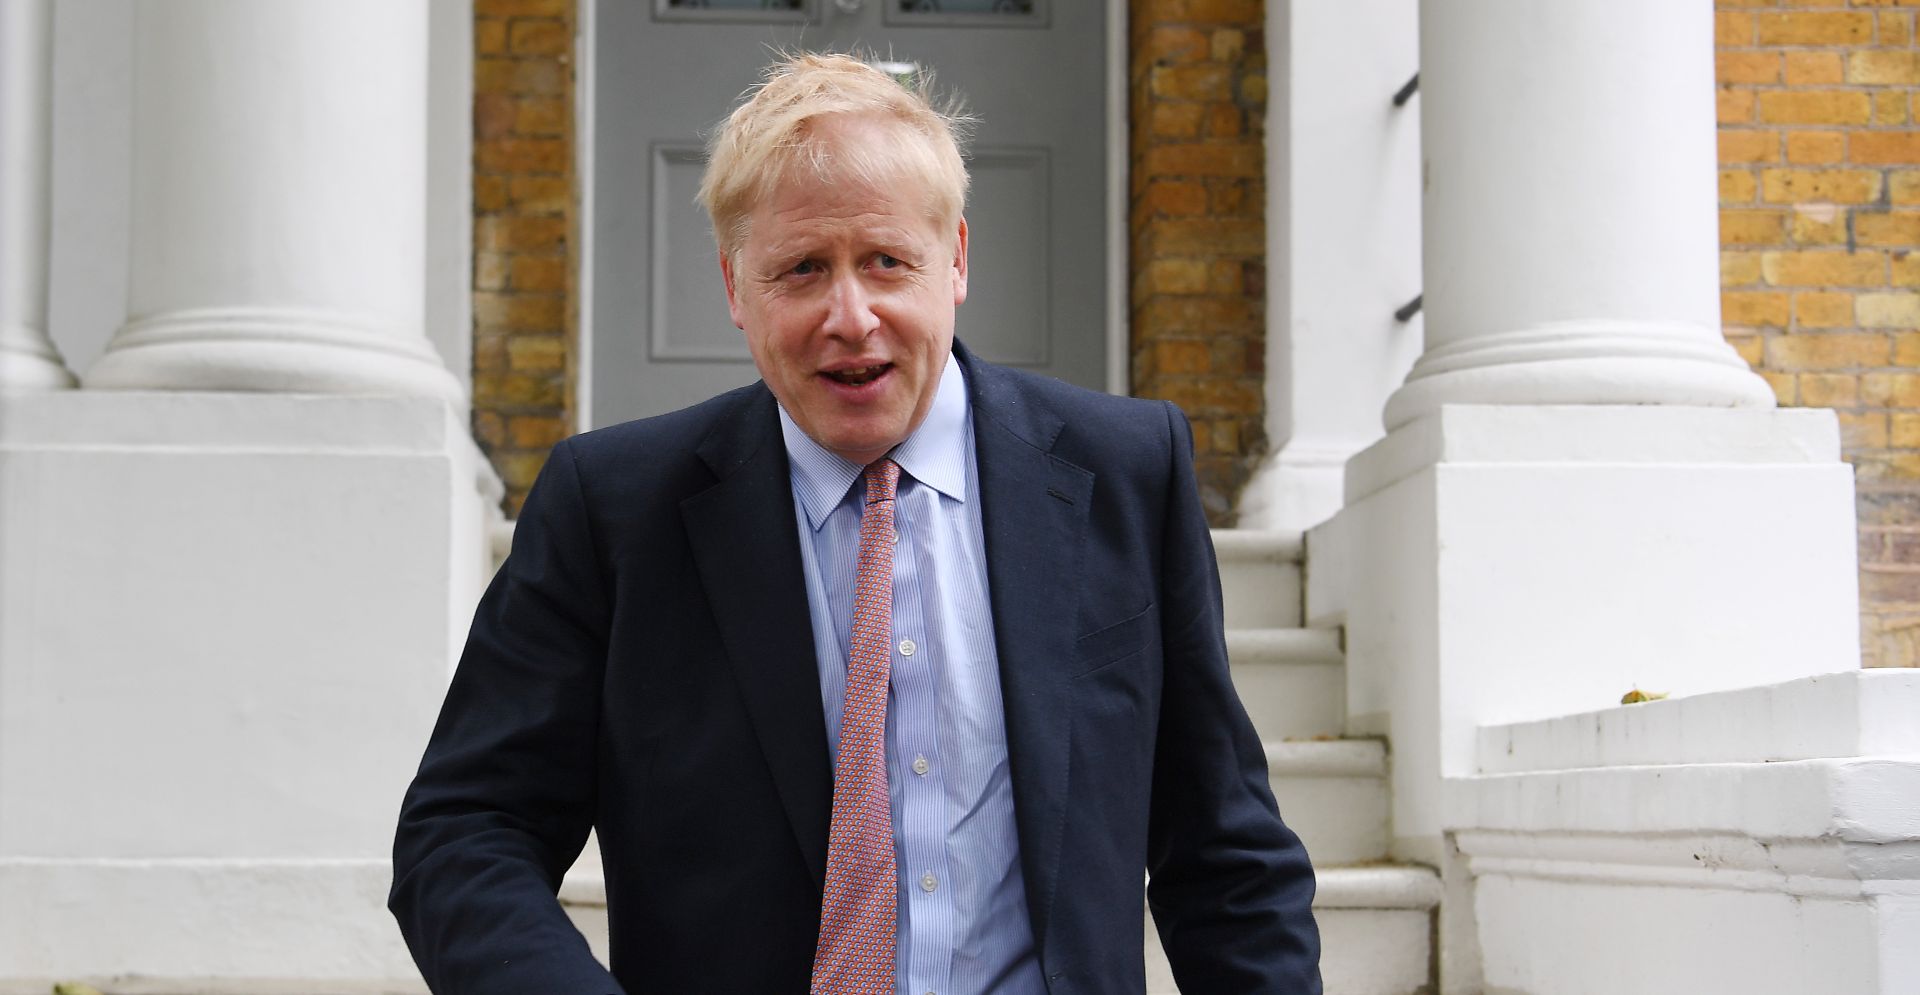 epa07609647 Former British foreign secretary Boris Johnson departs his home in London, Britain, 29 May 2019. Media reports state that Johnson has been summoned to court over misconduct claims over comments he made in the lead up to the EU referendum.  EPA/ANDY RAIN